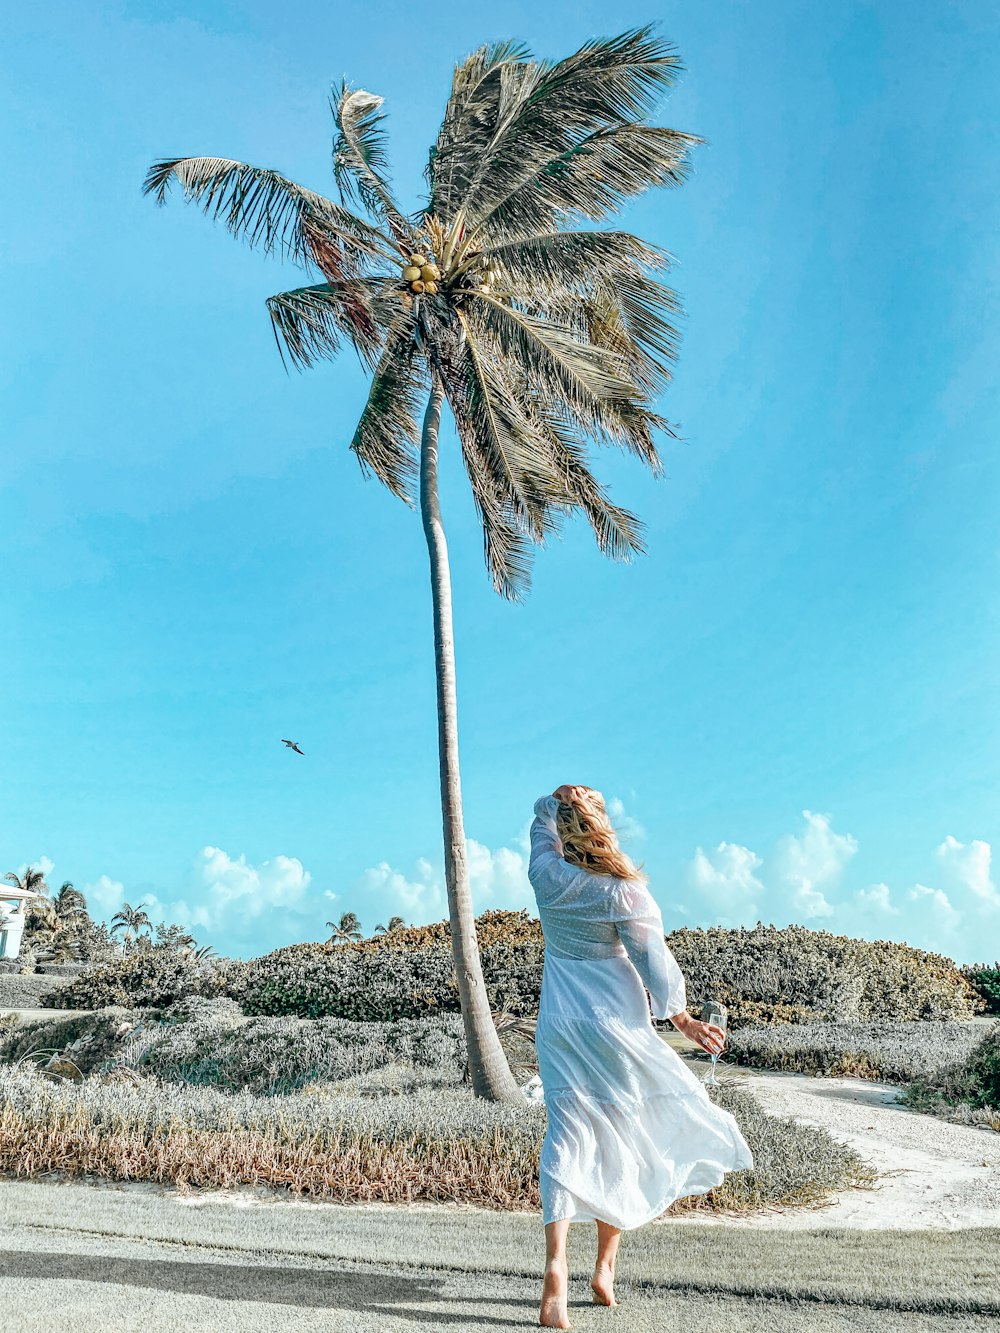 woman in white dress standing near palm tree during daytime